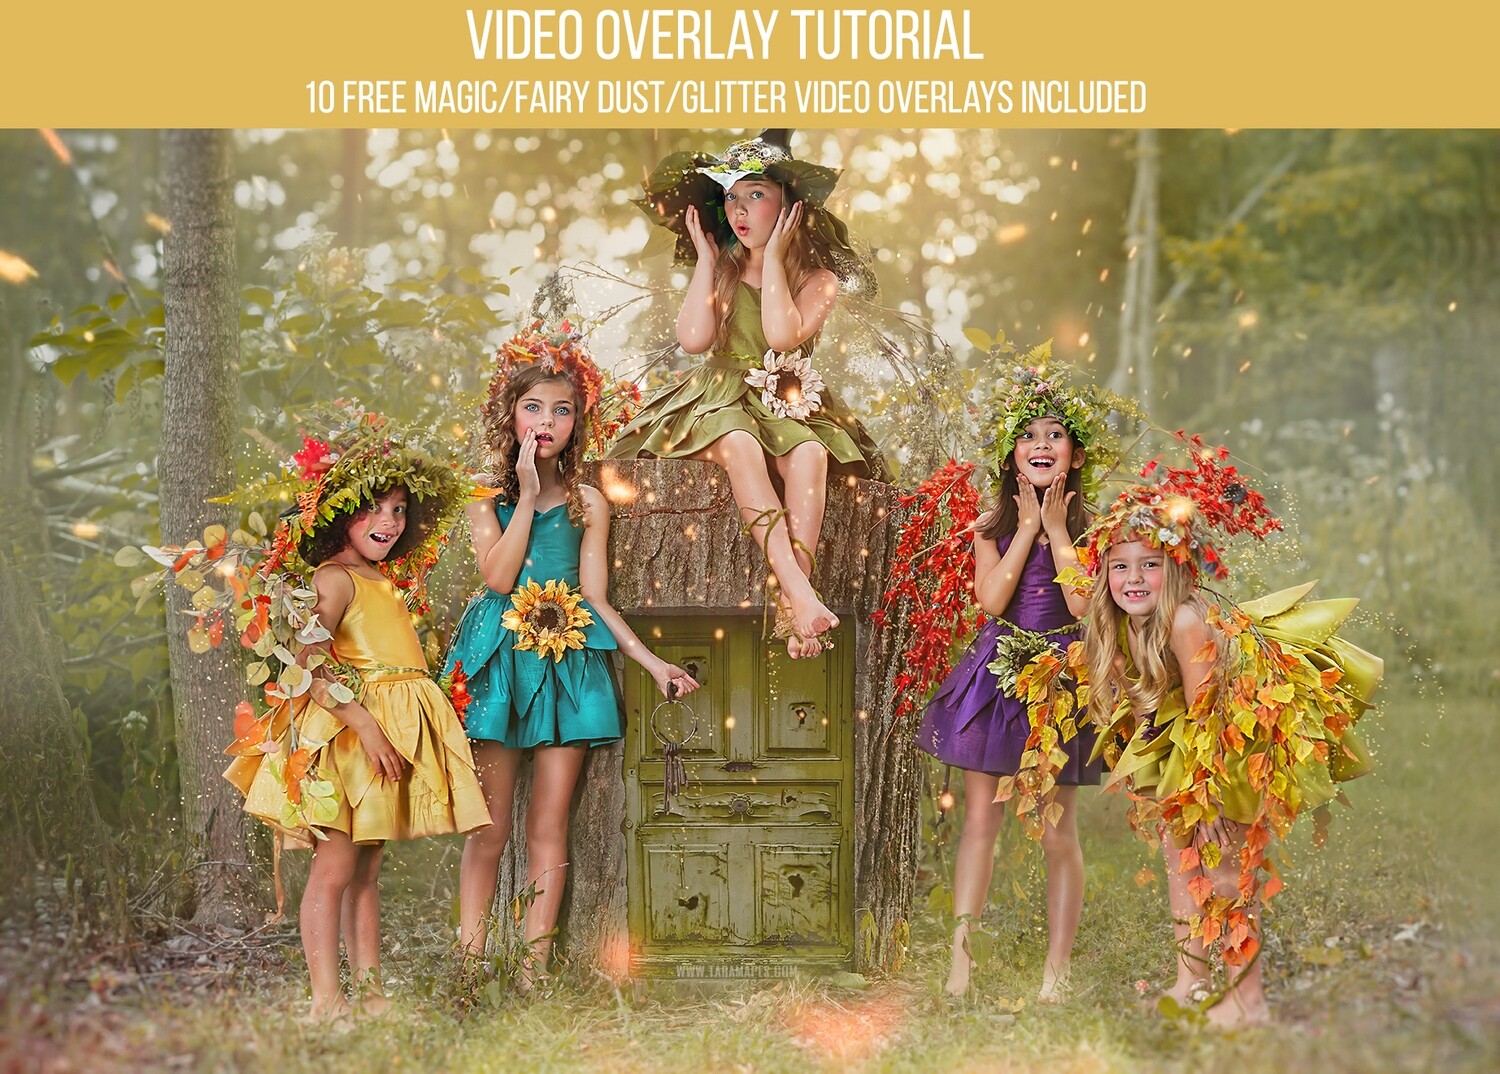 How to Add Video Overlays to your Images in Photoshop-  Ten Free Glitter Fairy Dust Video Overlays Included - Tutorial by Tara Mapes